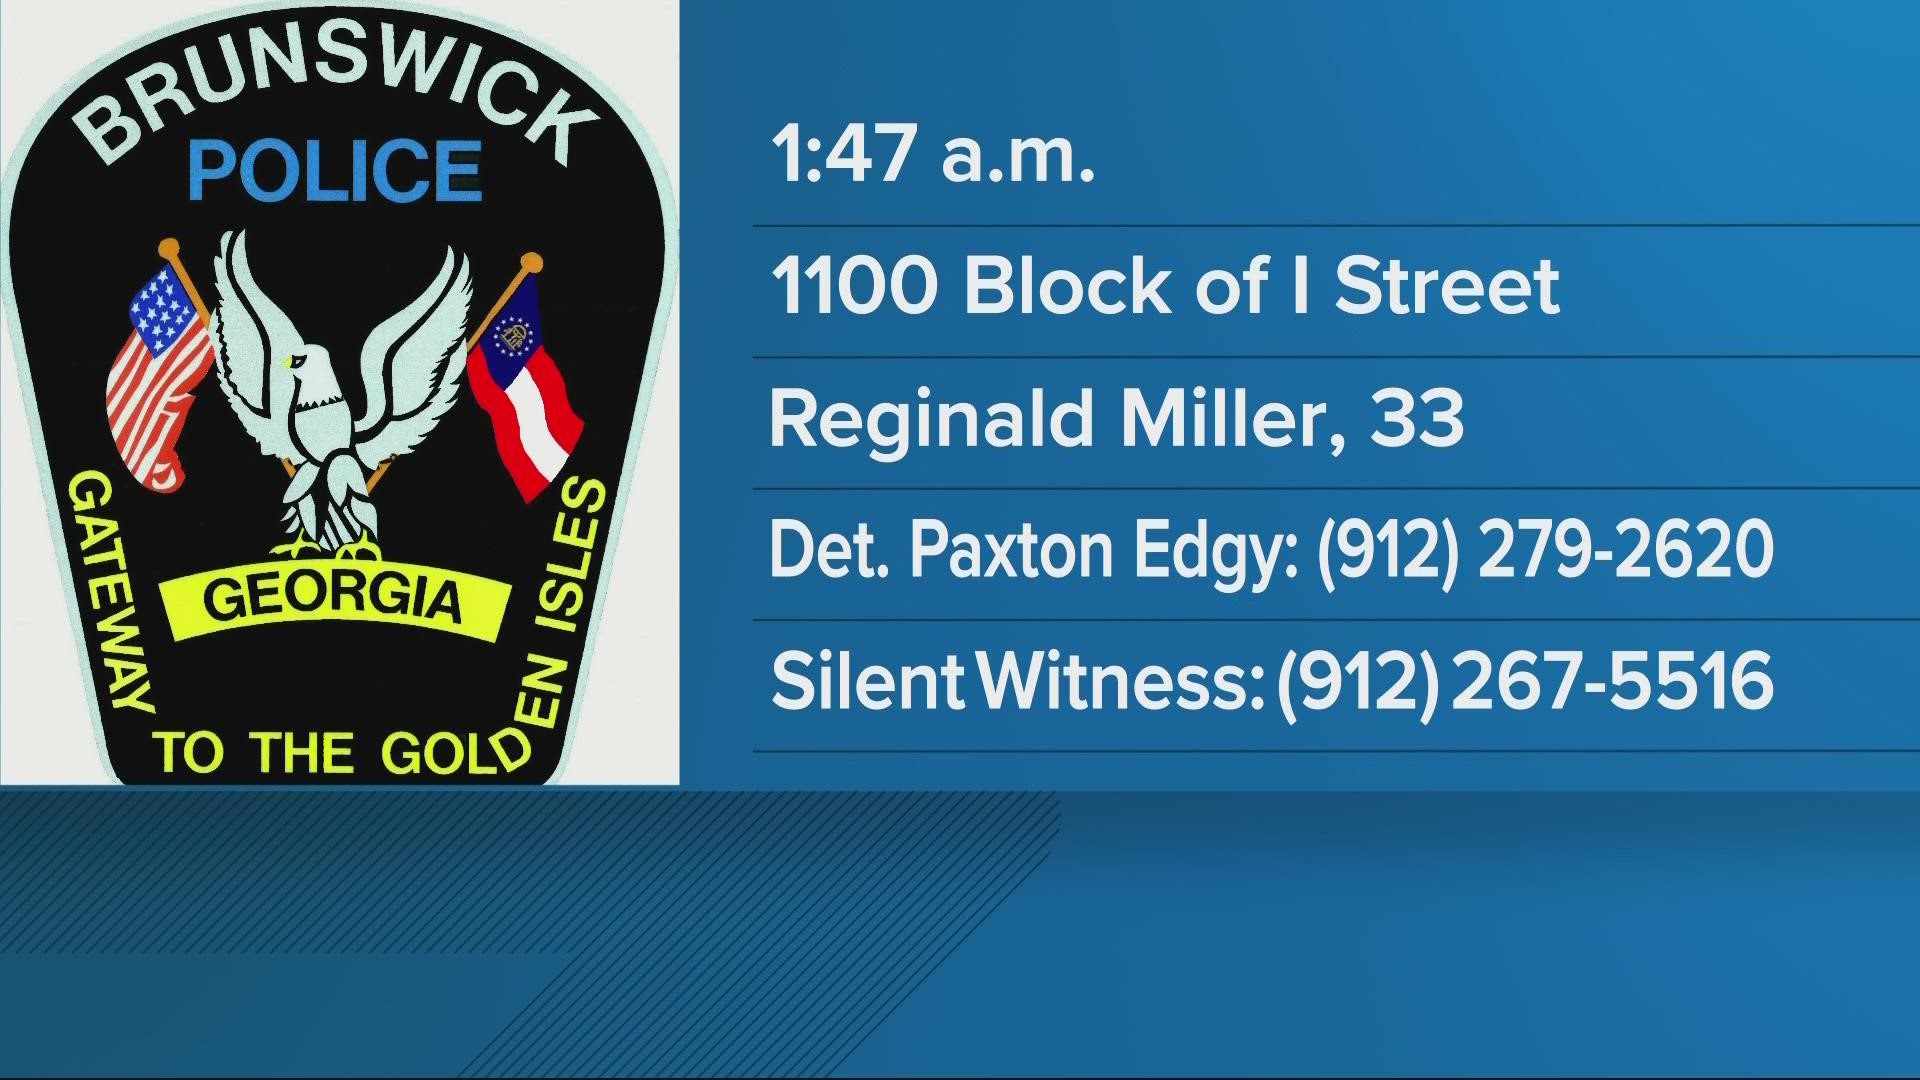 Police found a man laying in the 1100 block of I Street after being shot around 1:47 a.m.